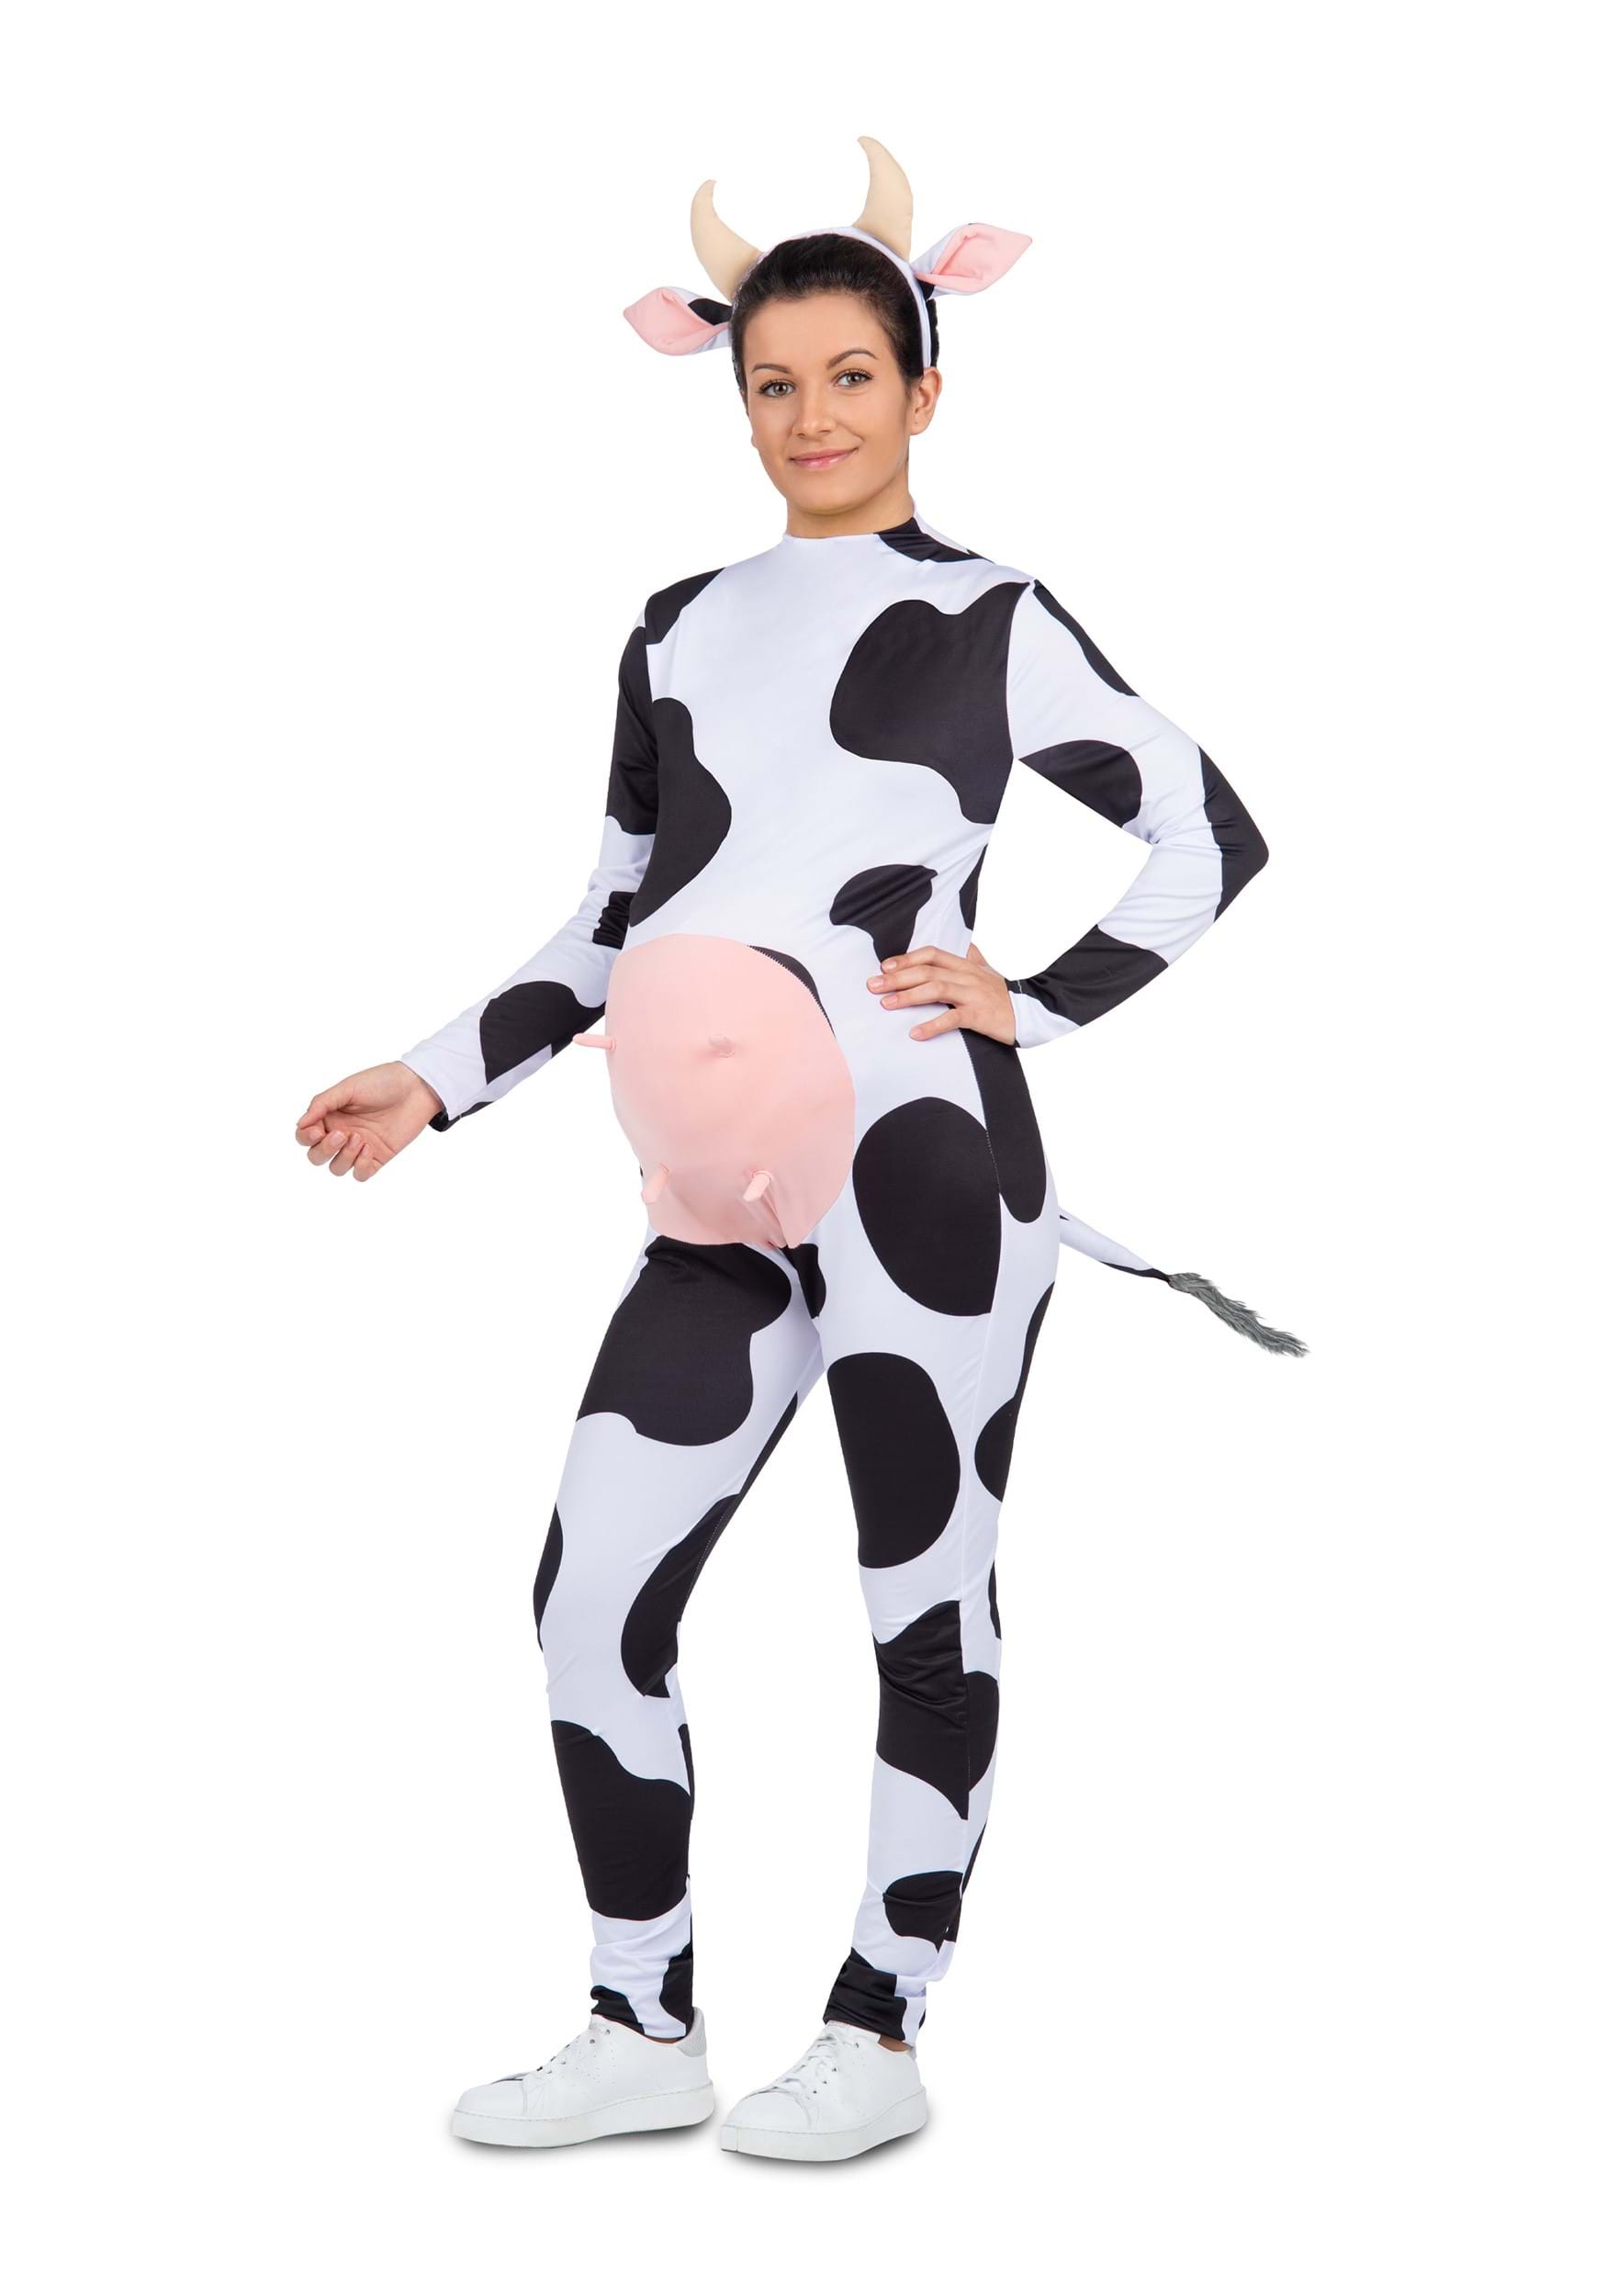 Halloween Costume Ideas For Pregnant Women  CheezCake  Parenting   Relationships  Food  Lifestyle